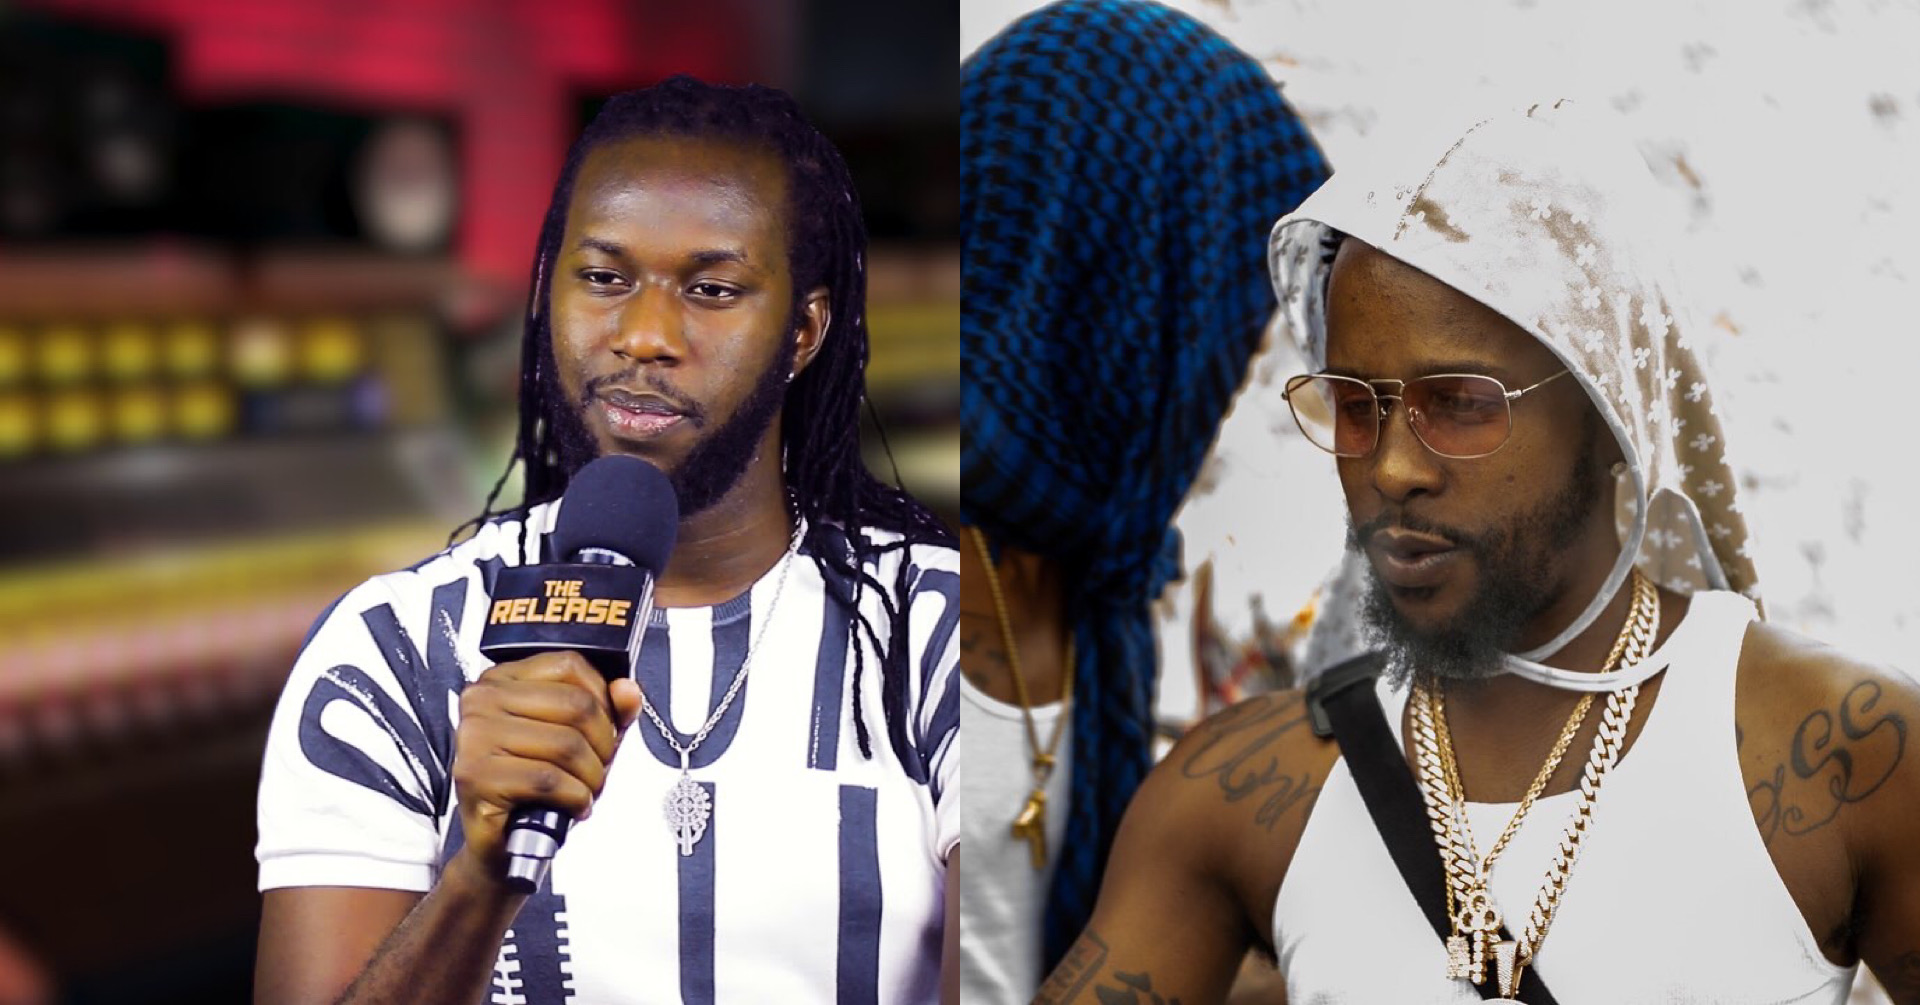 Producer Markus Myrie Allegedly Disses Popcaan In Leaked Voice note ...